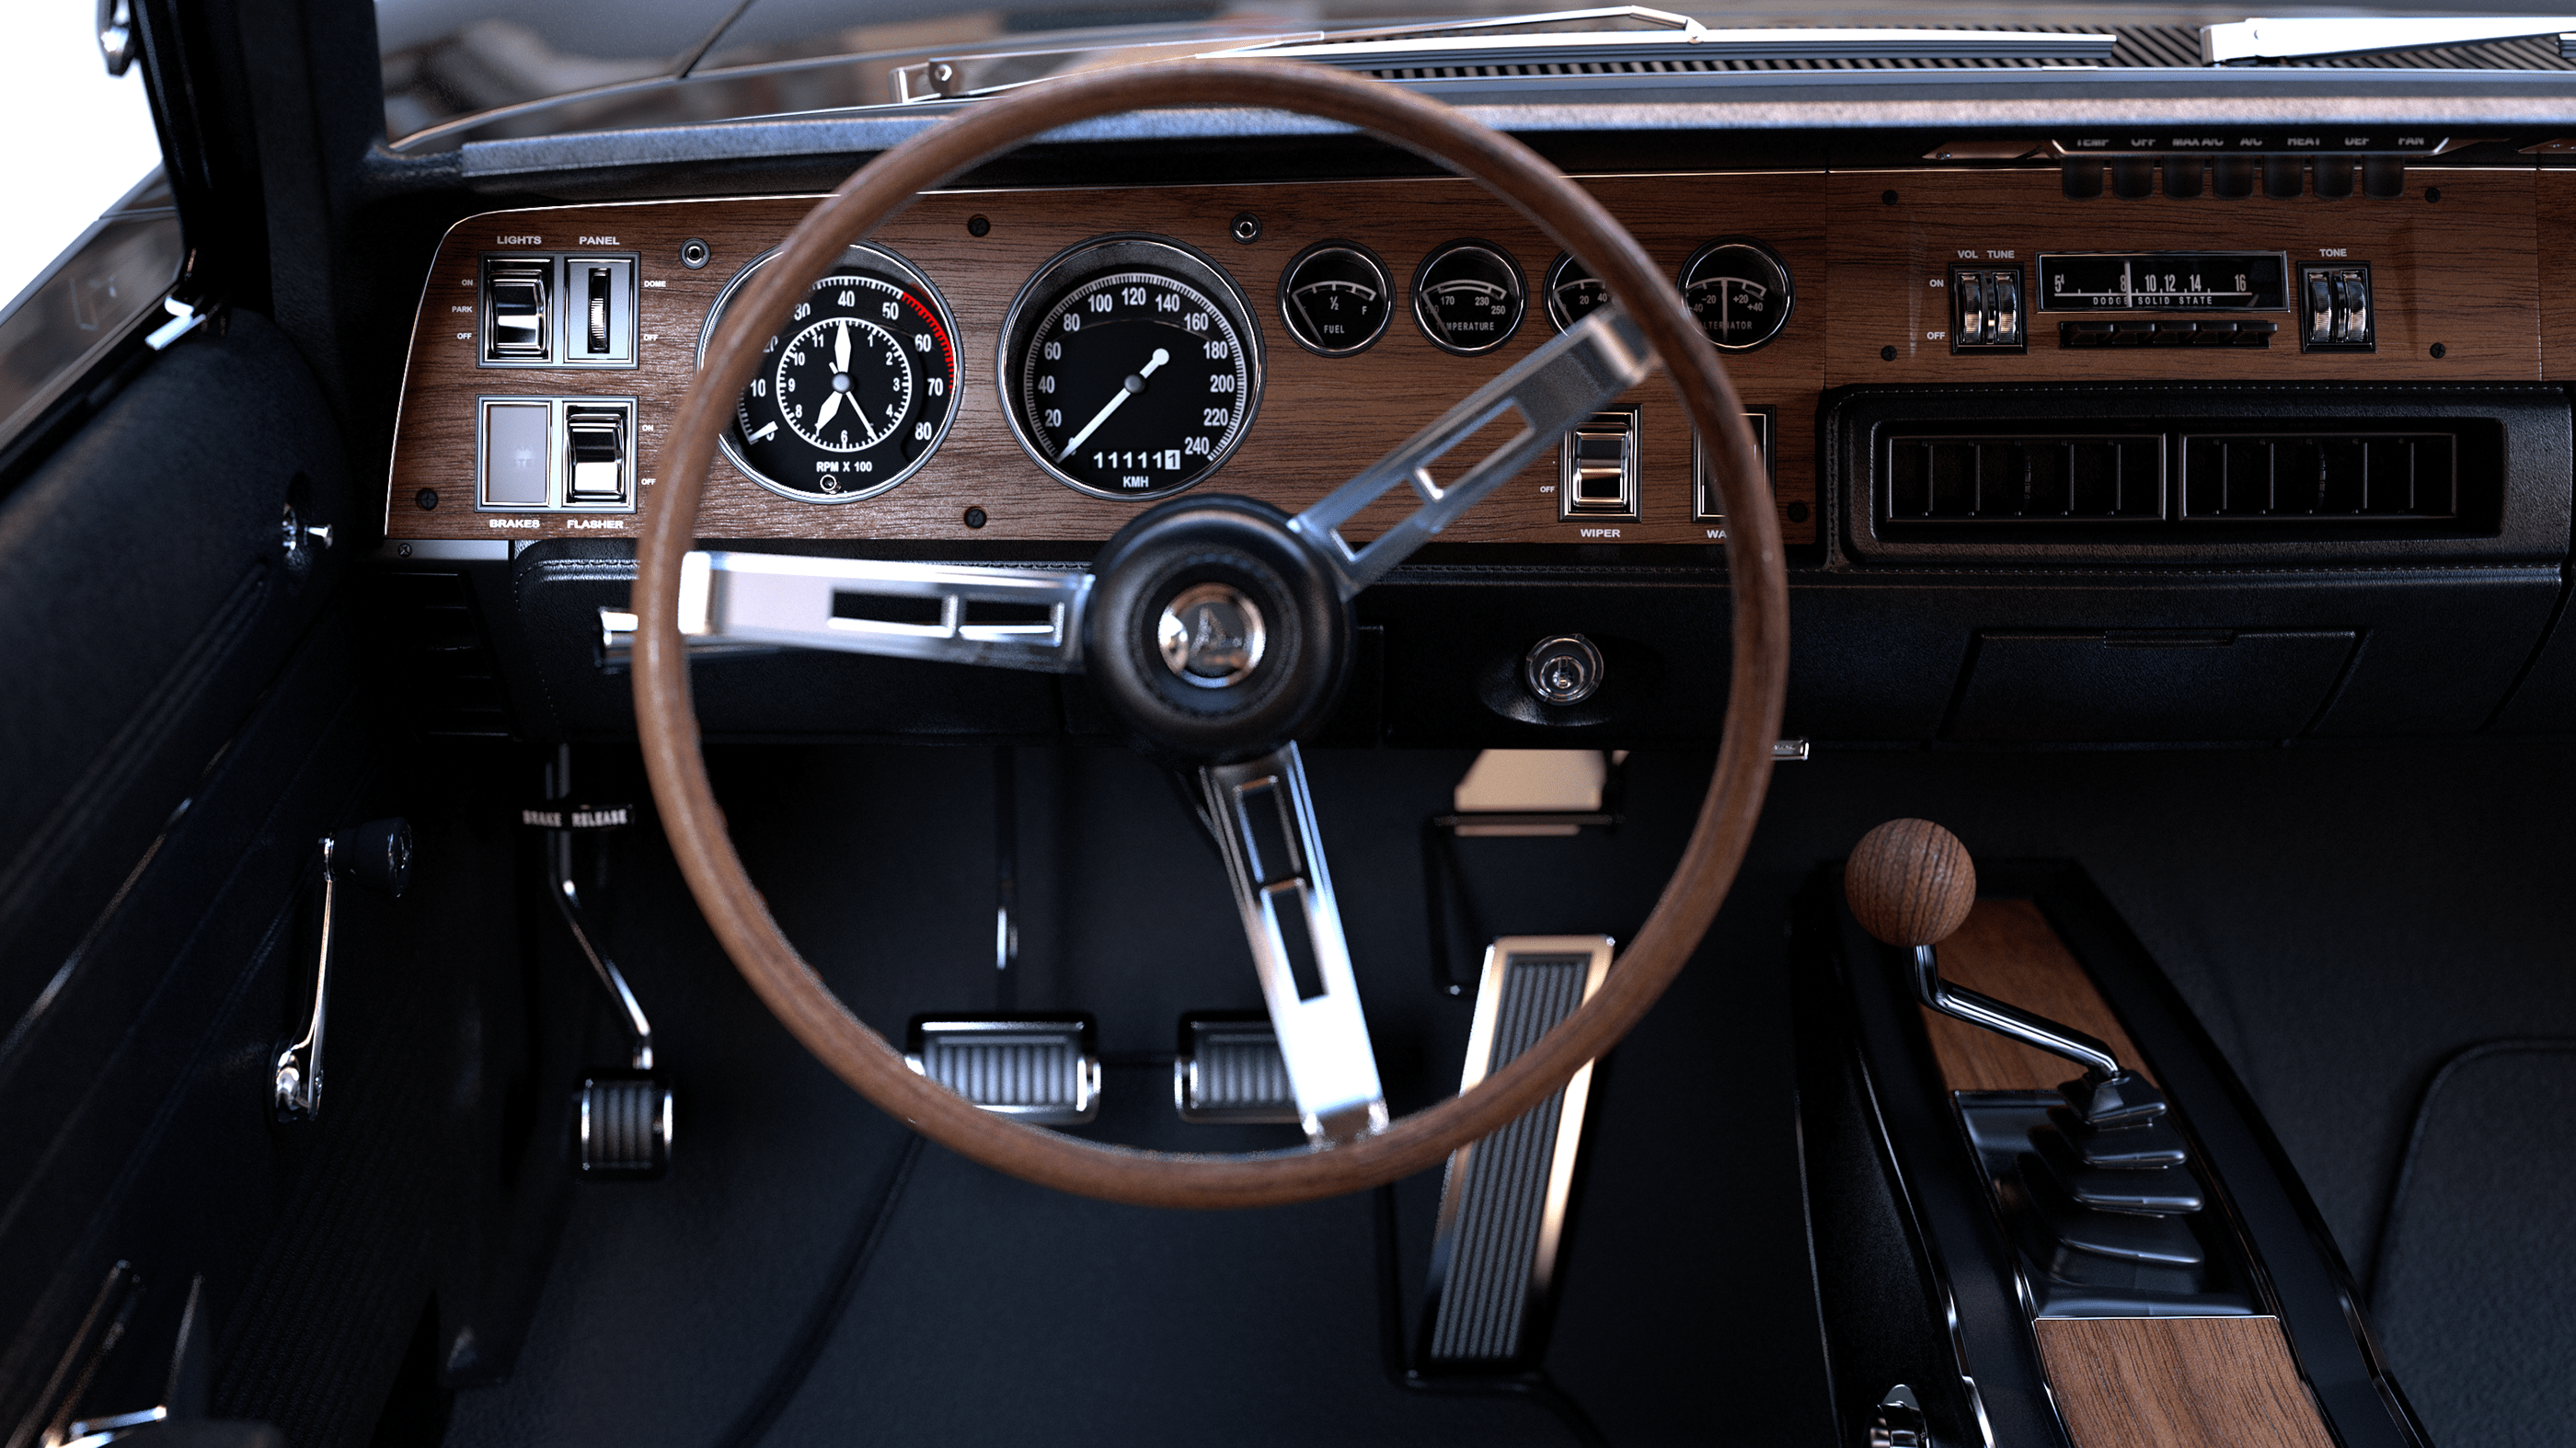 opening Walnut play Dodge Charger 1969 Interior CGI on Behance